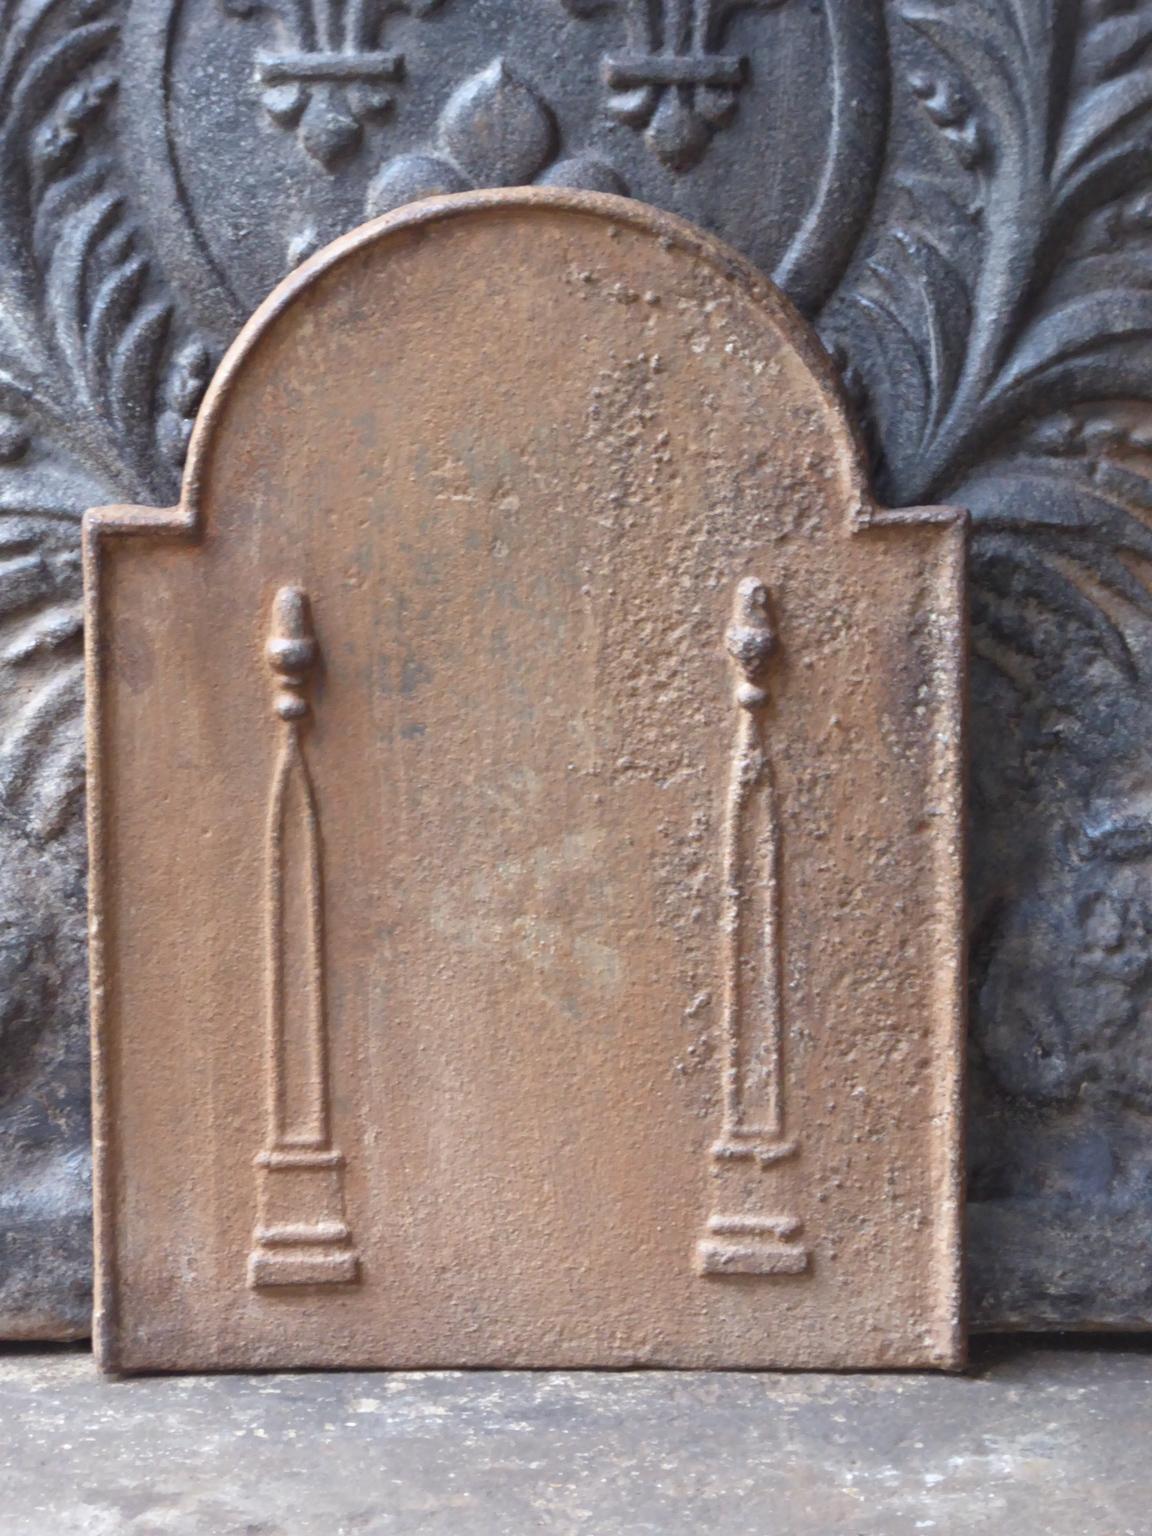 Small 19th century French neoclassical fireback with two pillars of freedom. The pillars symbolize the value liberty, one of the three values of the French revolution. 

The fireback is made of cast iron and has a natural brown patina. Upon request